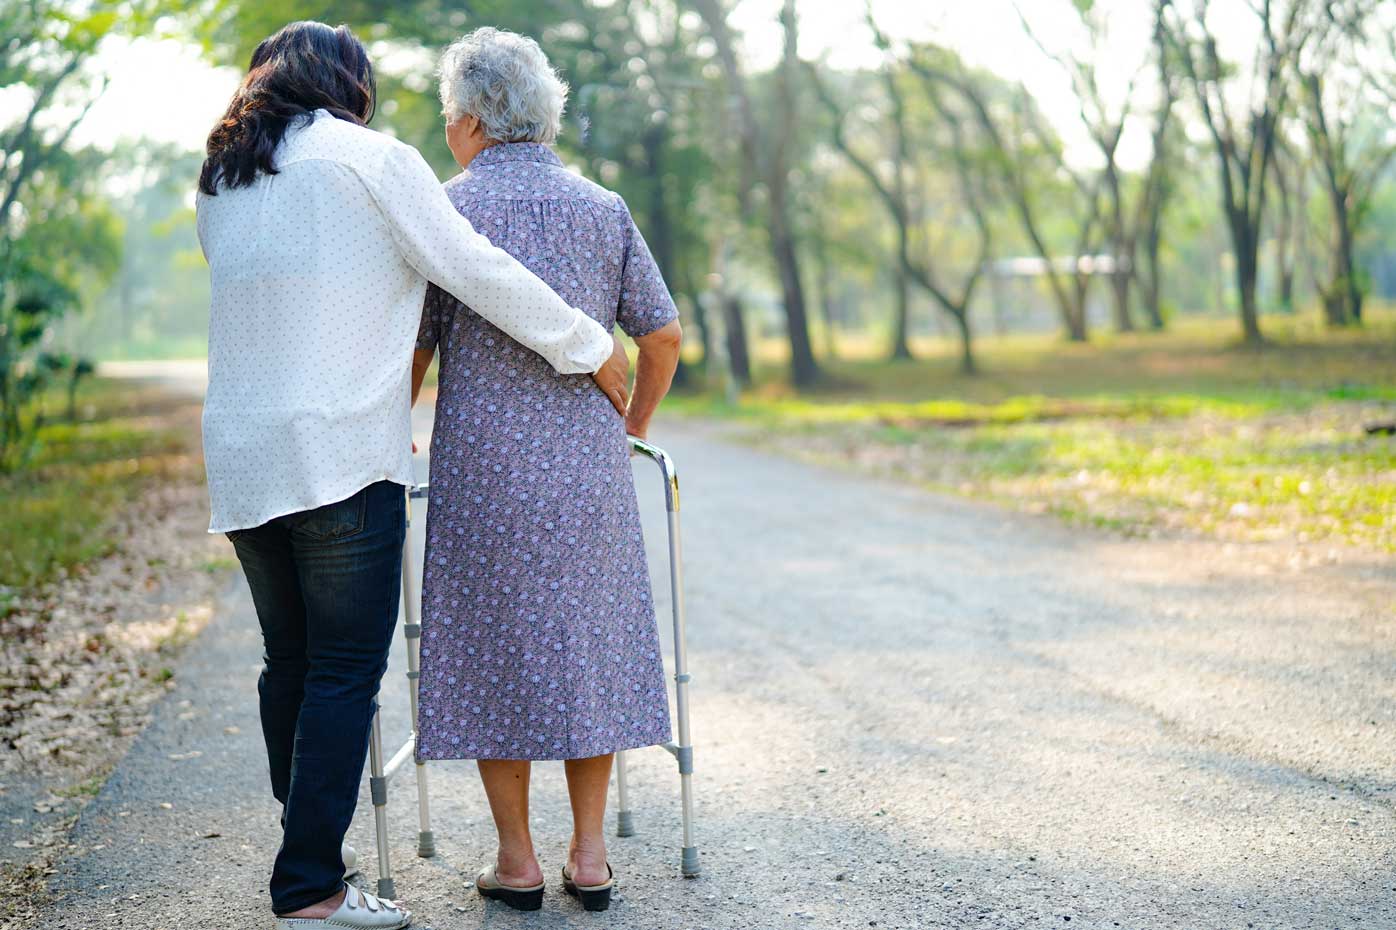 A caregiver assists an elderly woman enjoy a park while moving with a walker